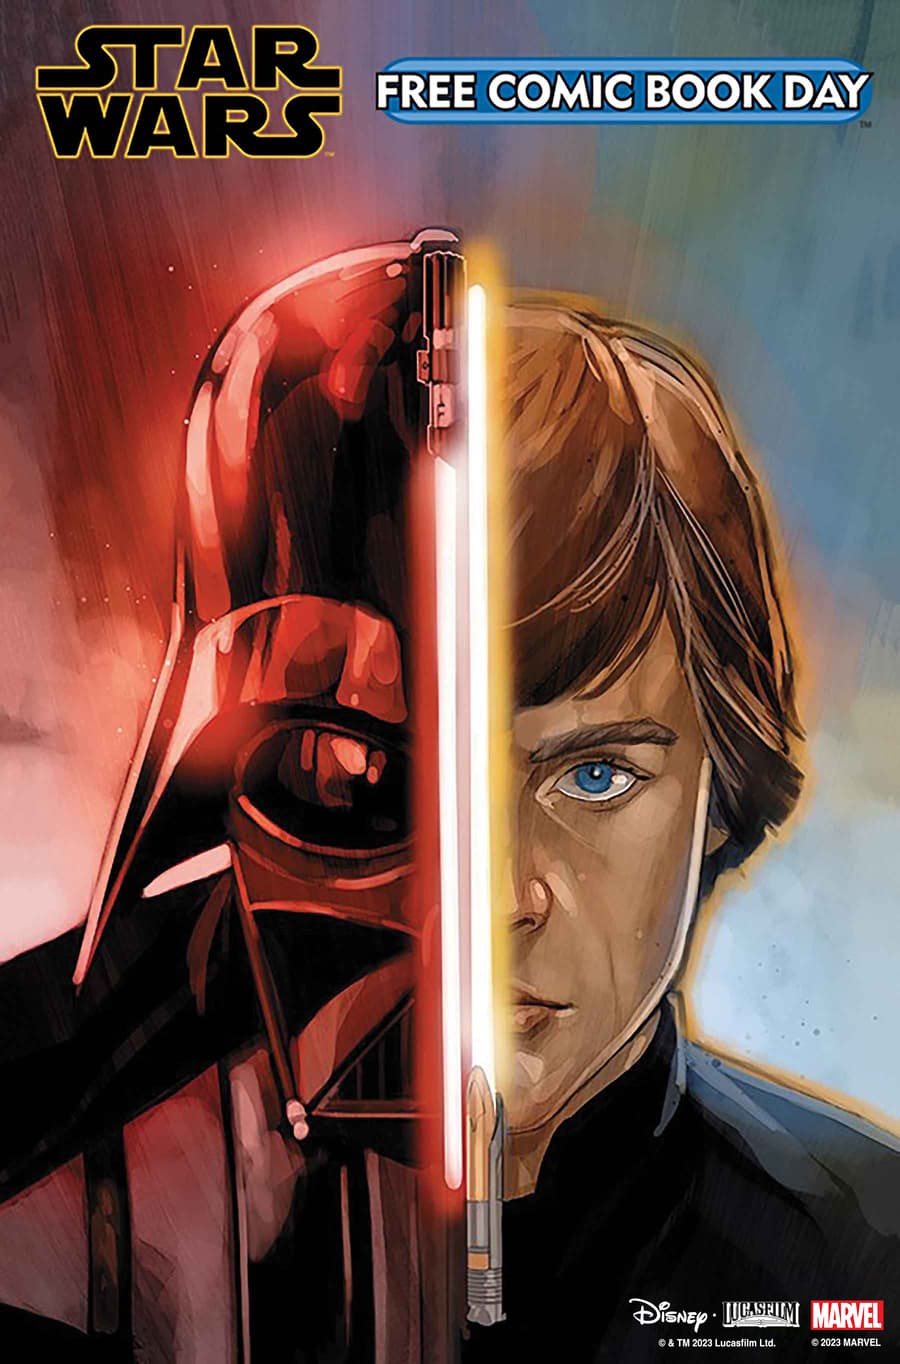 FREE COMIC BOOK DAY 2024: STAR WARS/DARTH VADER #1 cover by Phil Noto